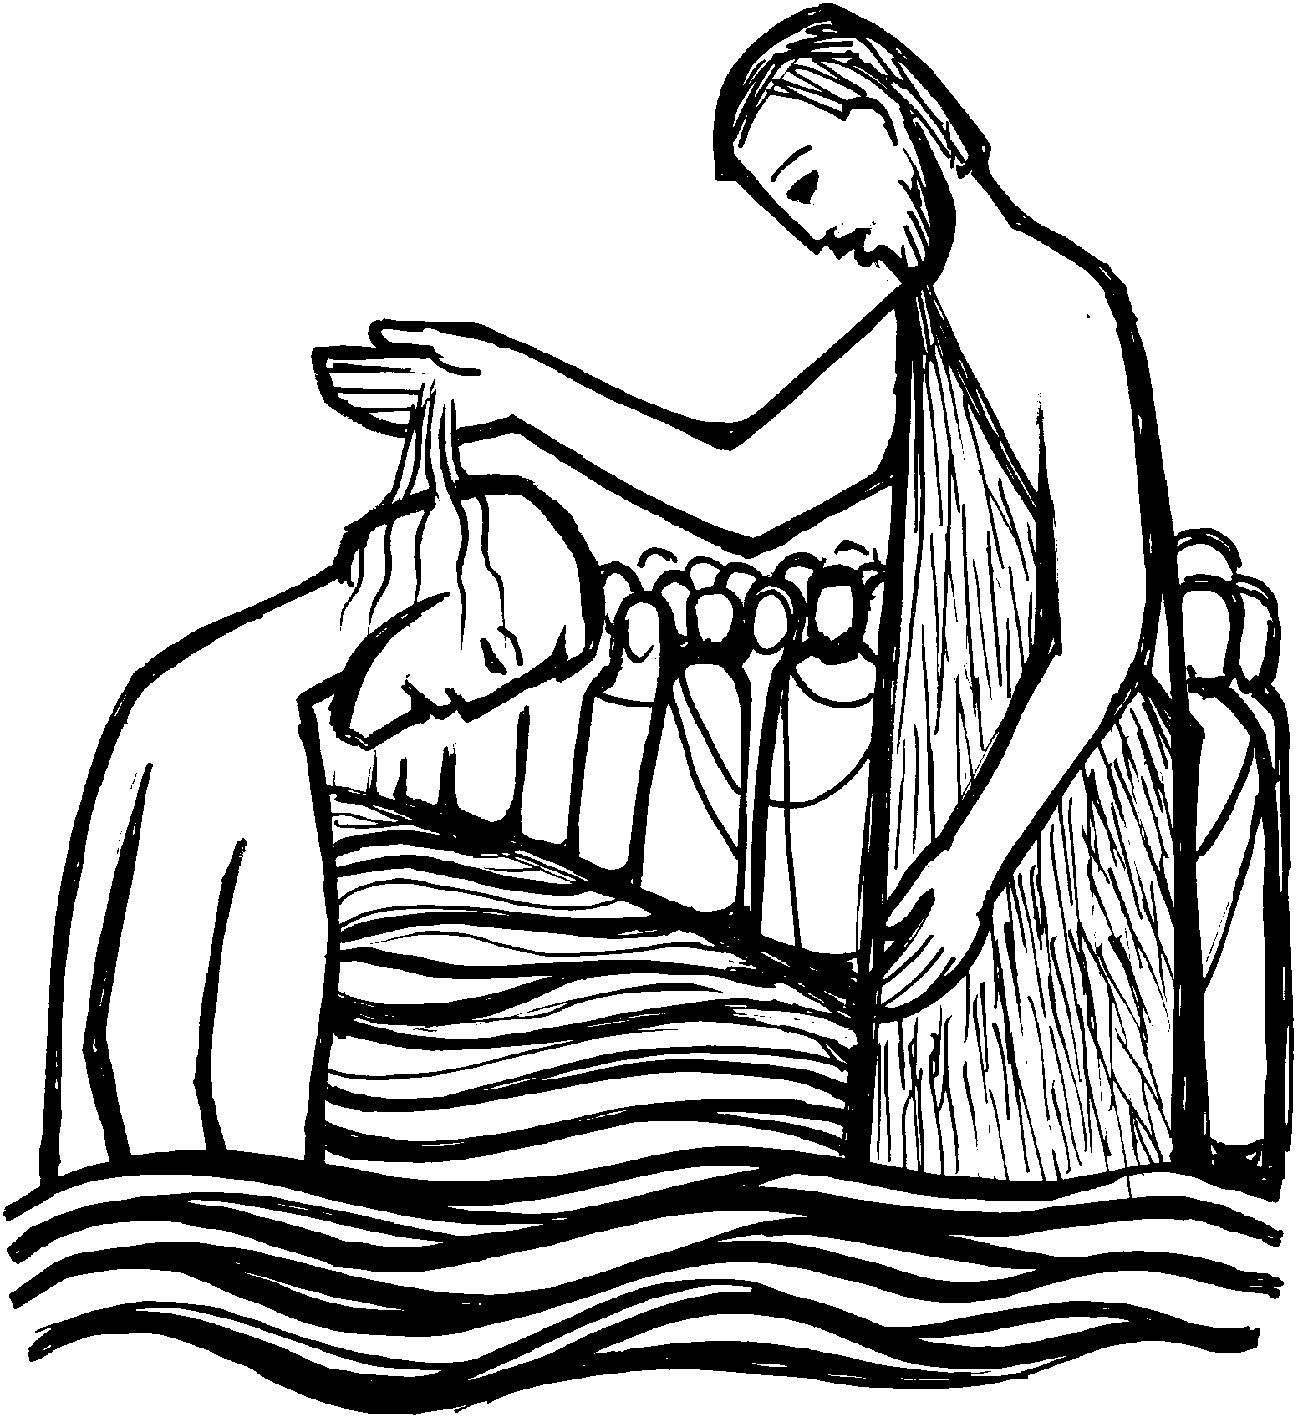 baptism of the lord clipart - photo #32